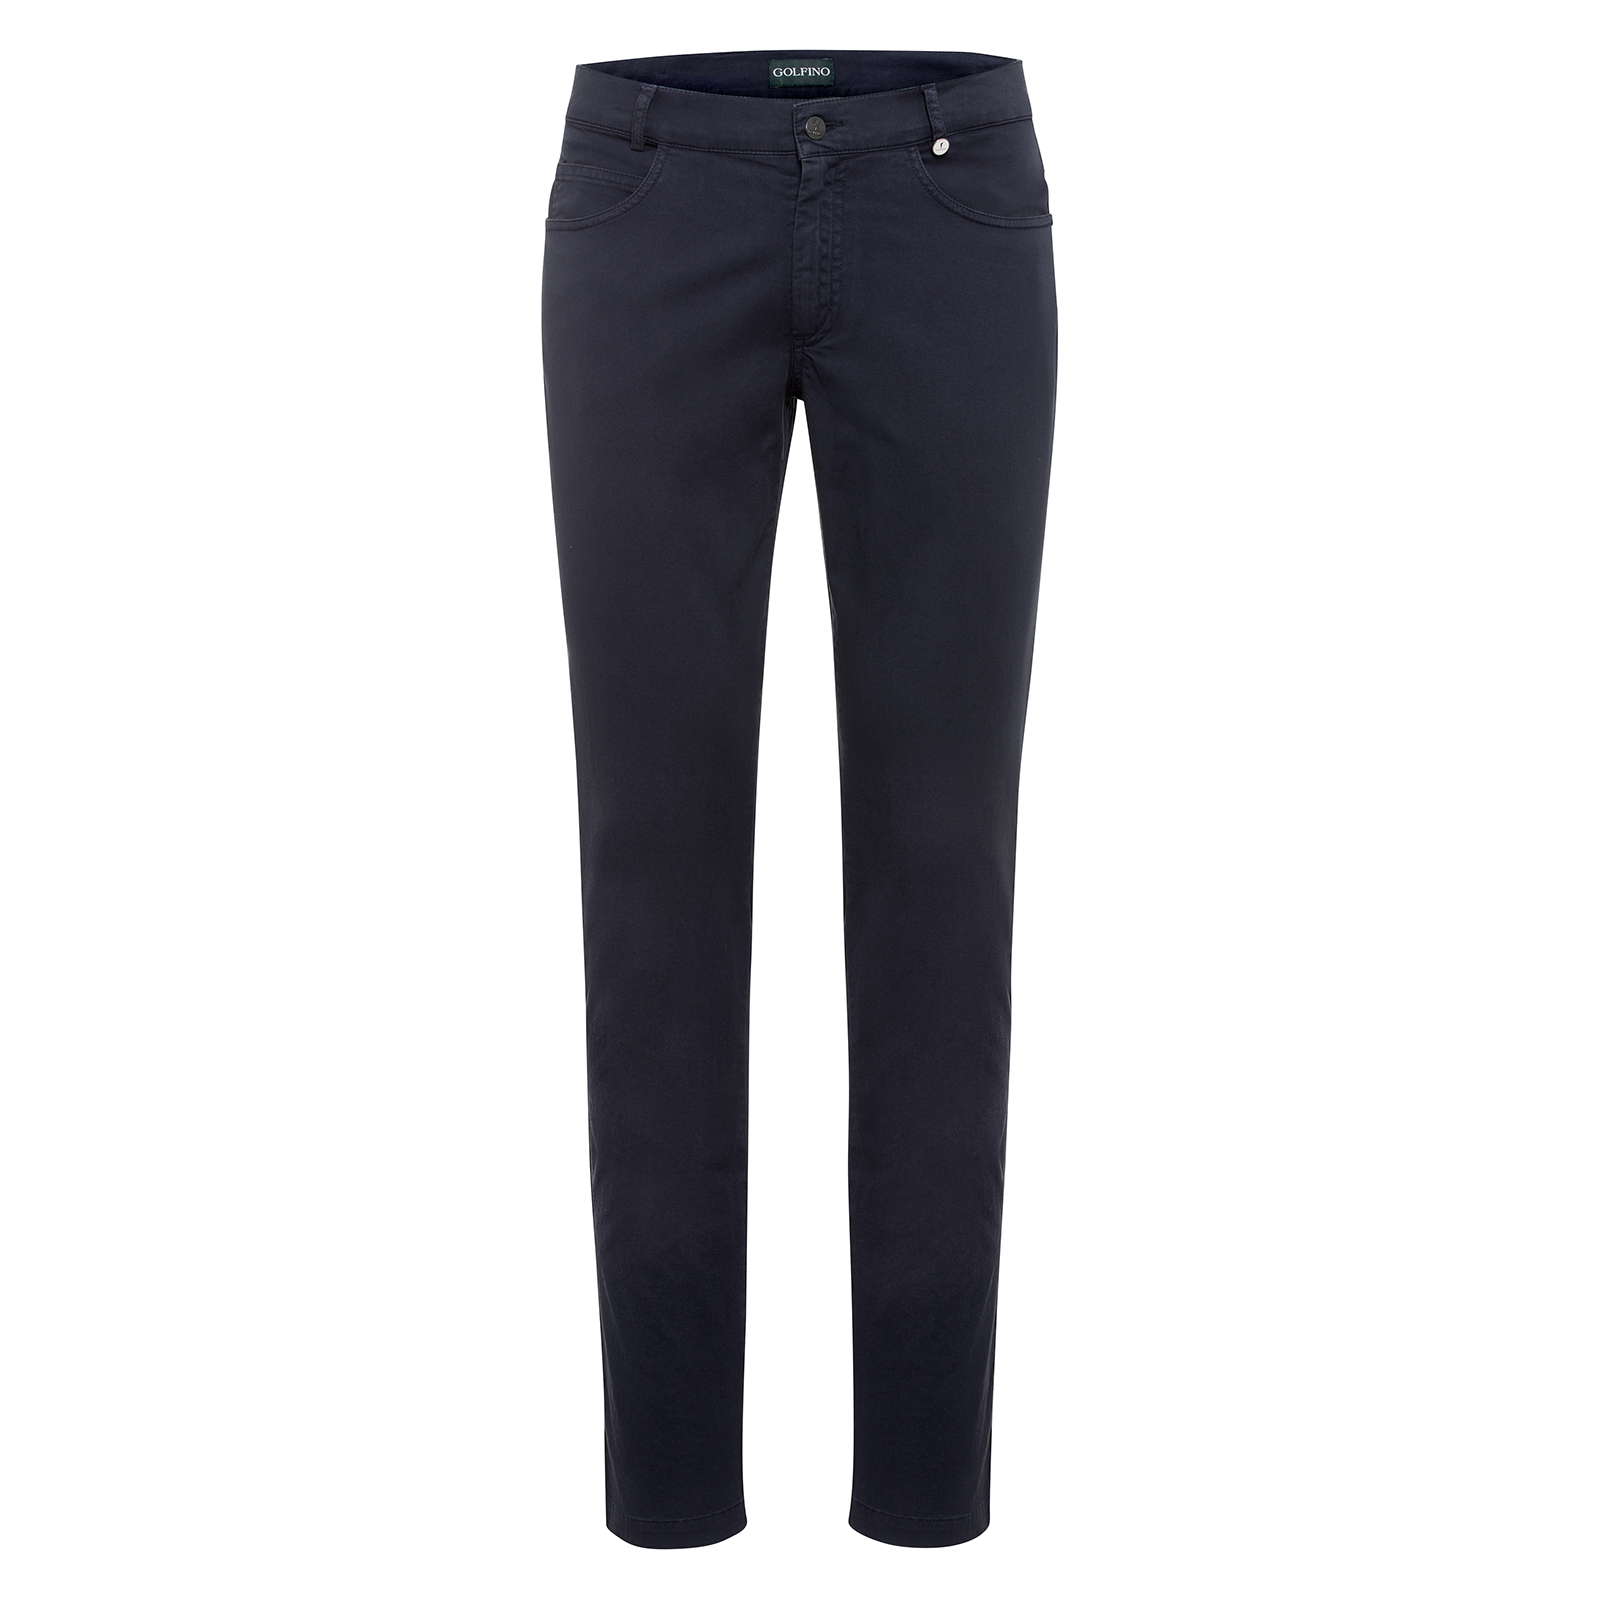 Men's Casual Cotton Trousers in Extra Slim Fit